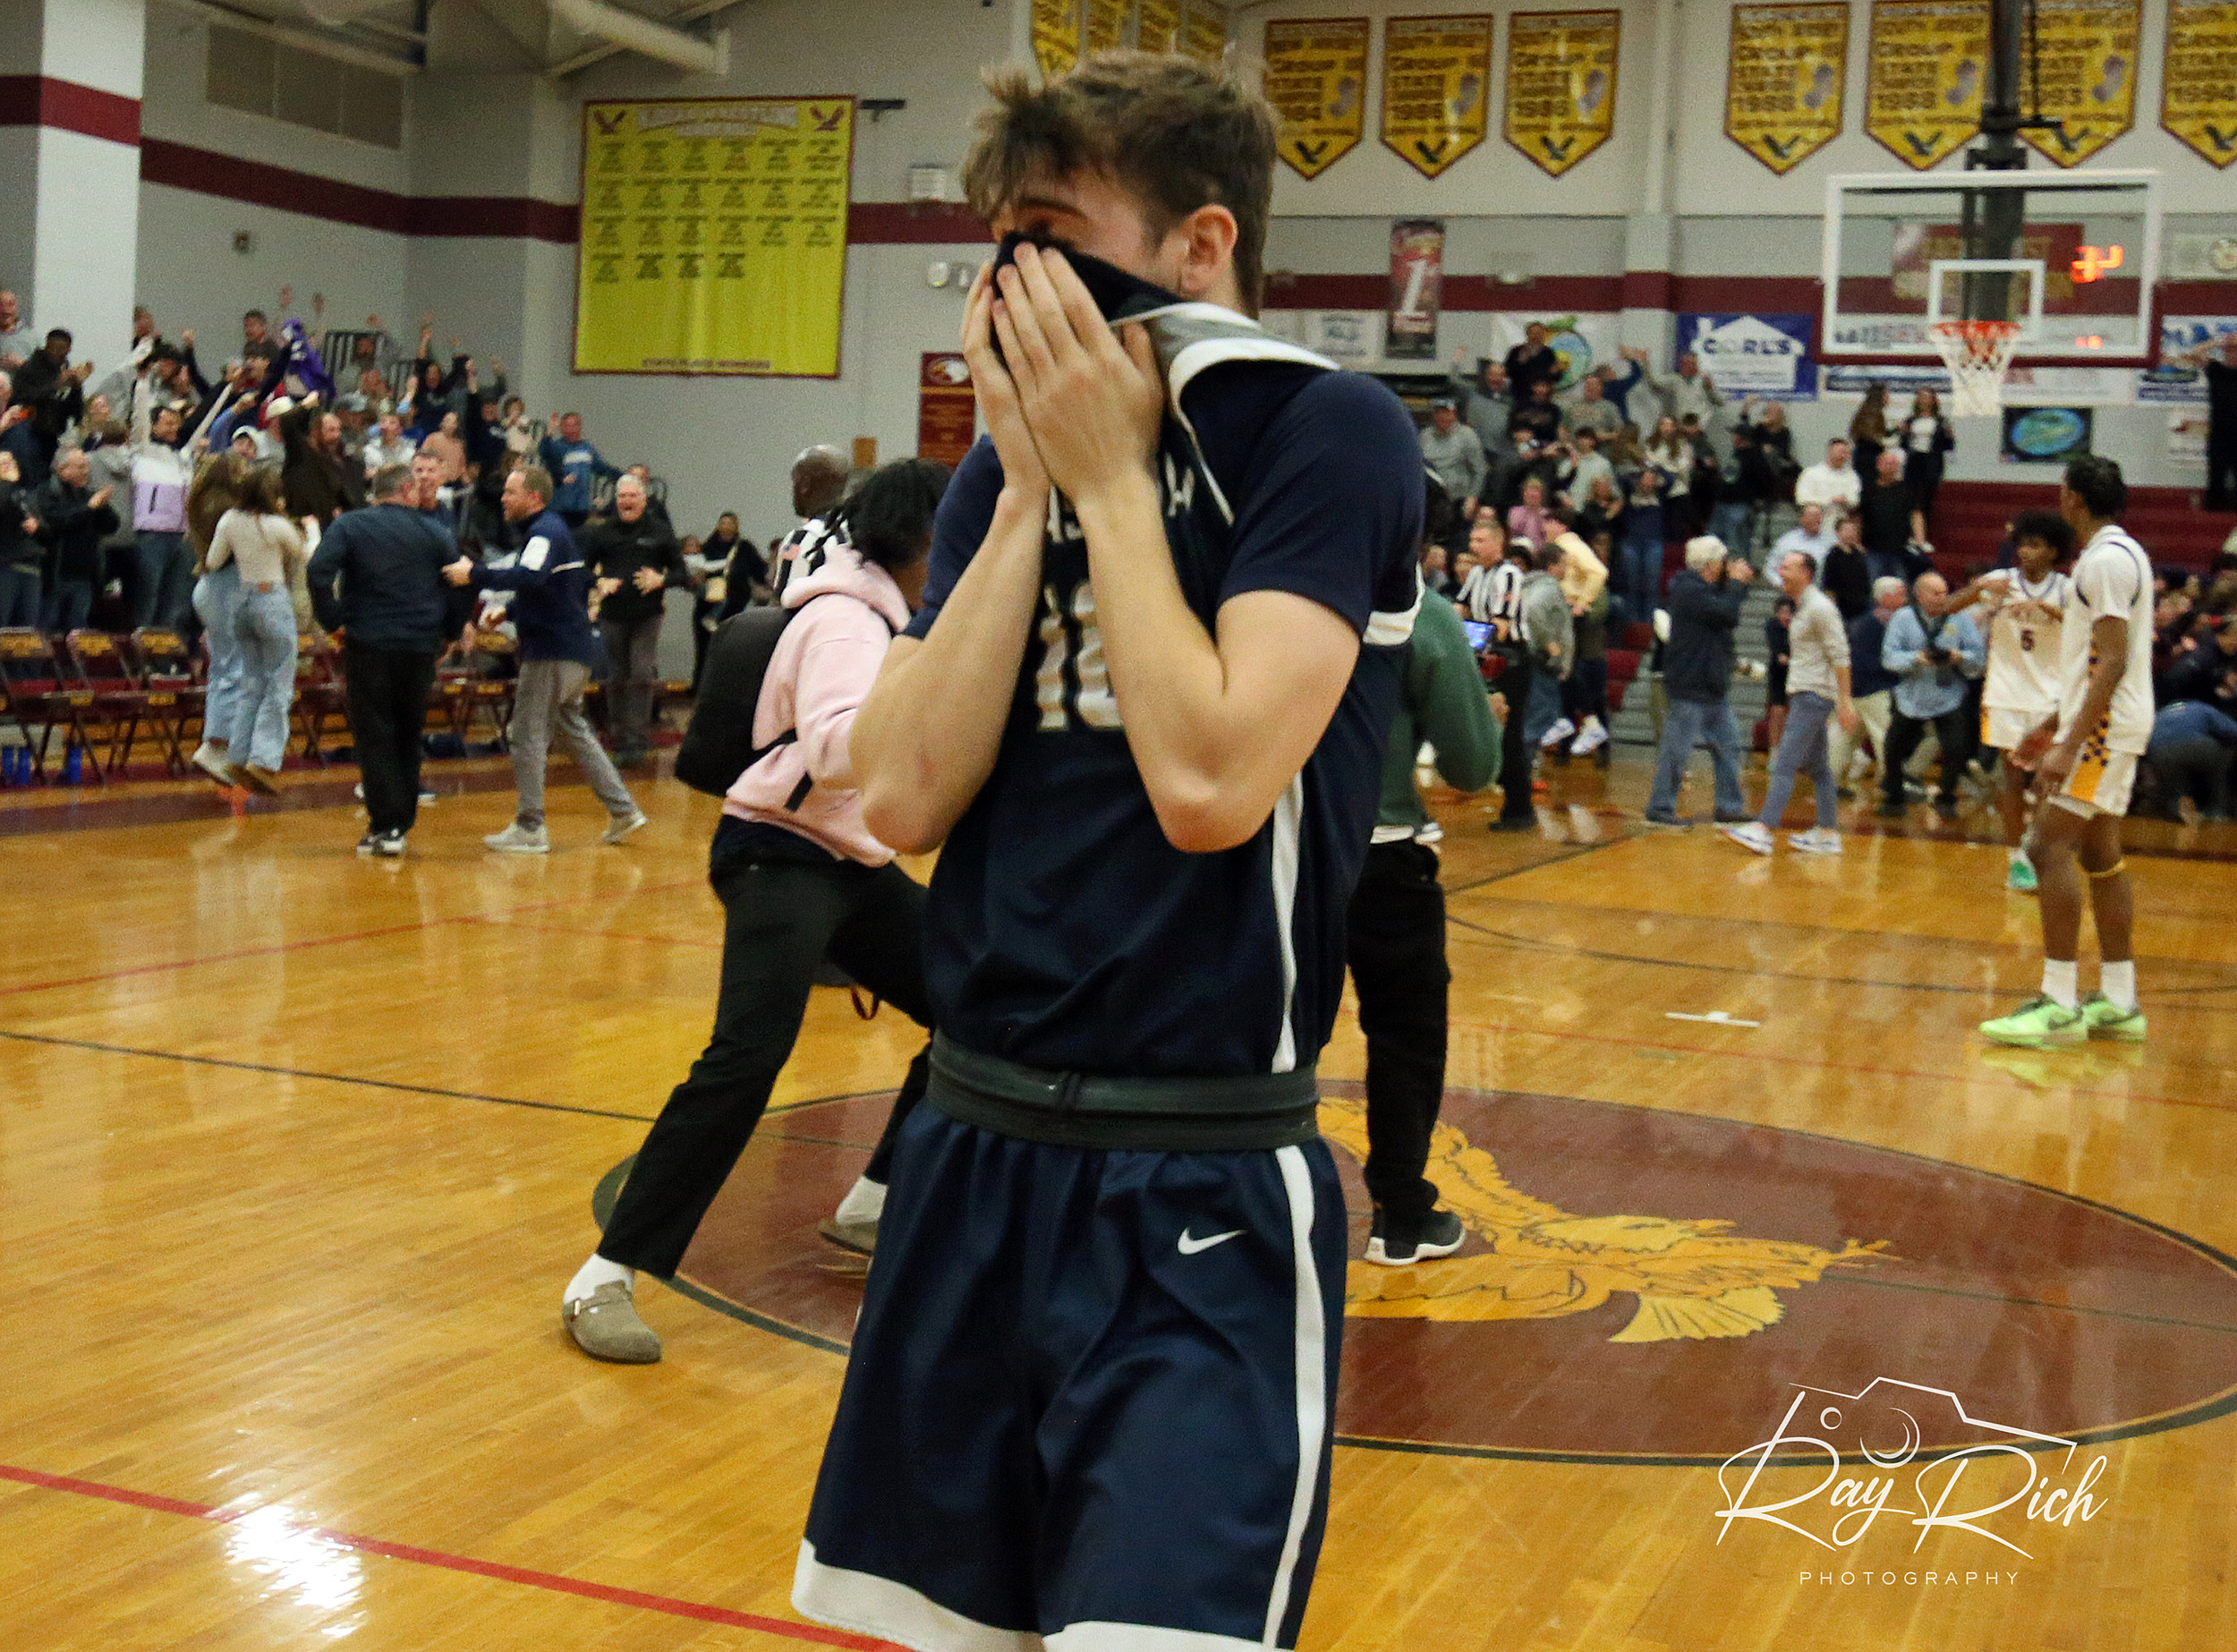 Manasquan senior Luke Roy reacts after finding out Manasquan's winning basket was overturned. (Photo by Ray Rich Photography)